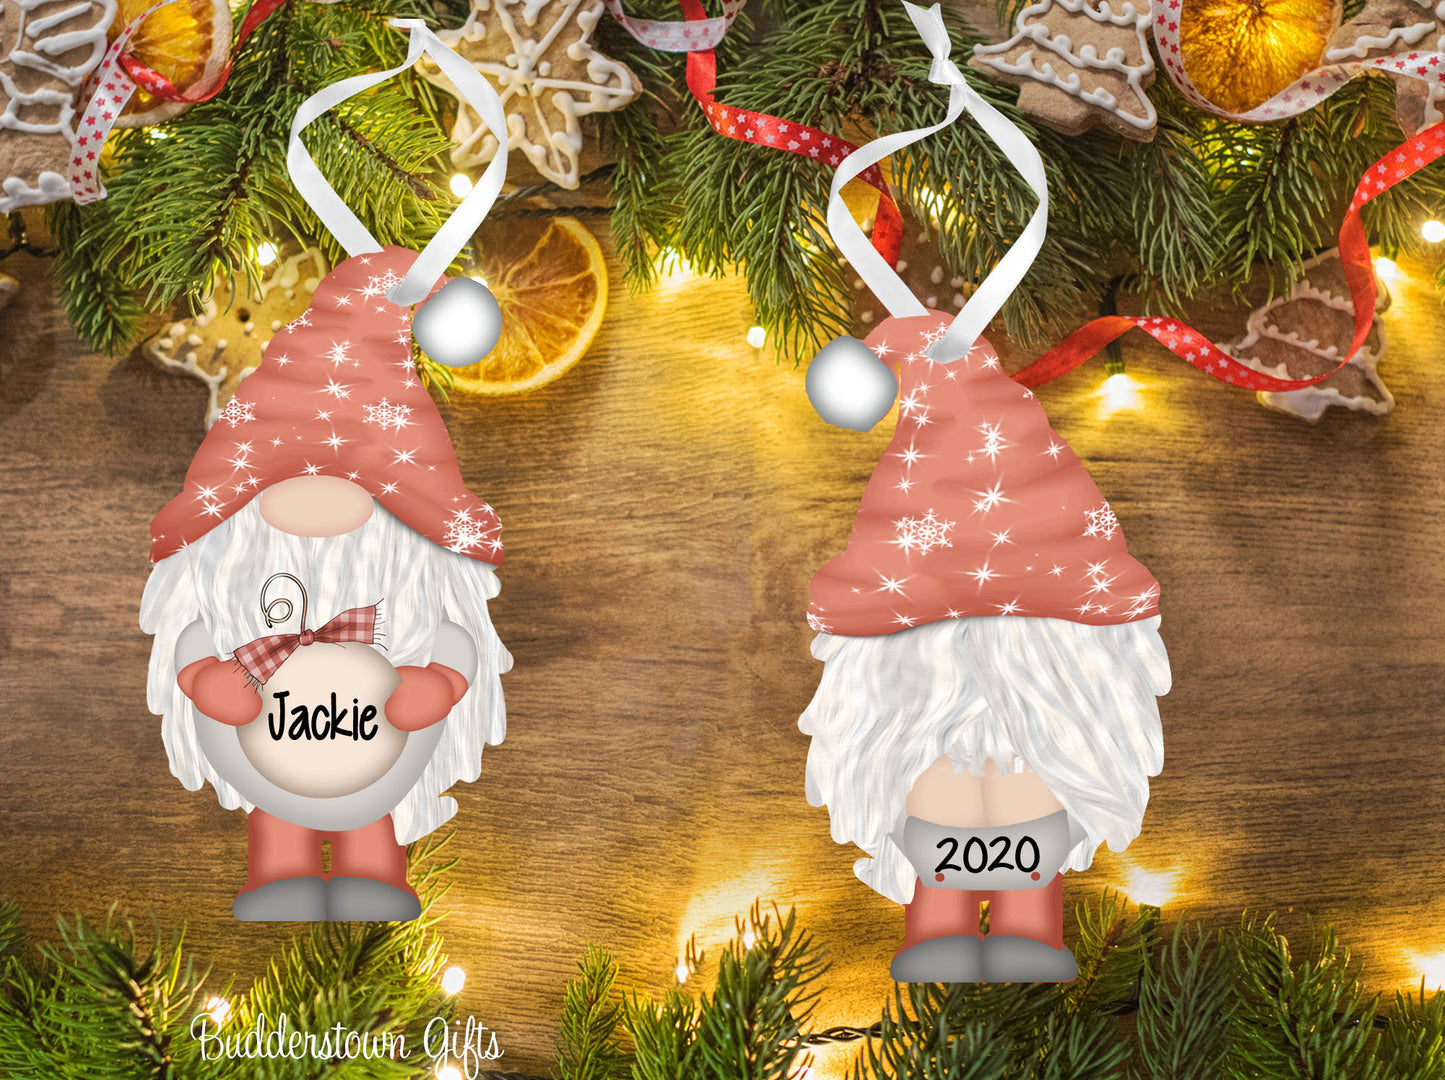 Holiday / Christmas GNOME Ornaments - Personalized ornament - 4 Colors to choose from